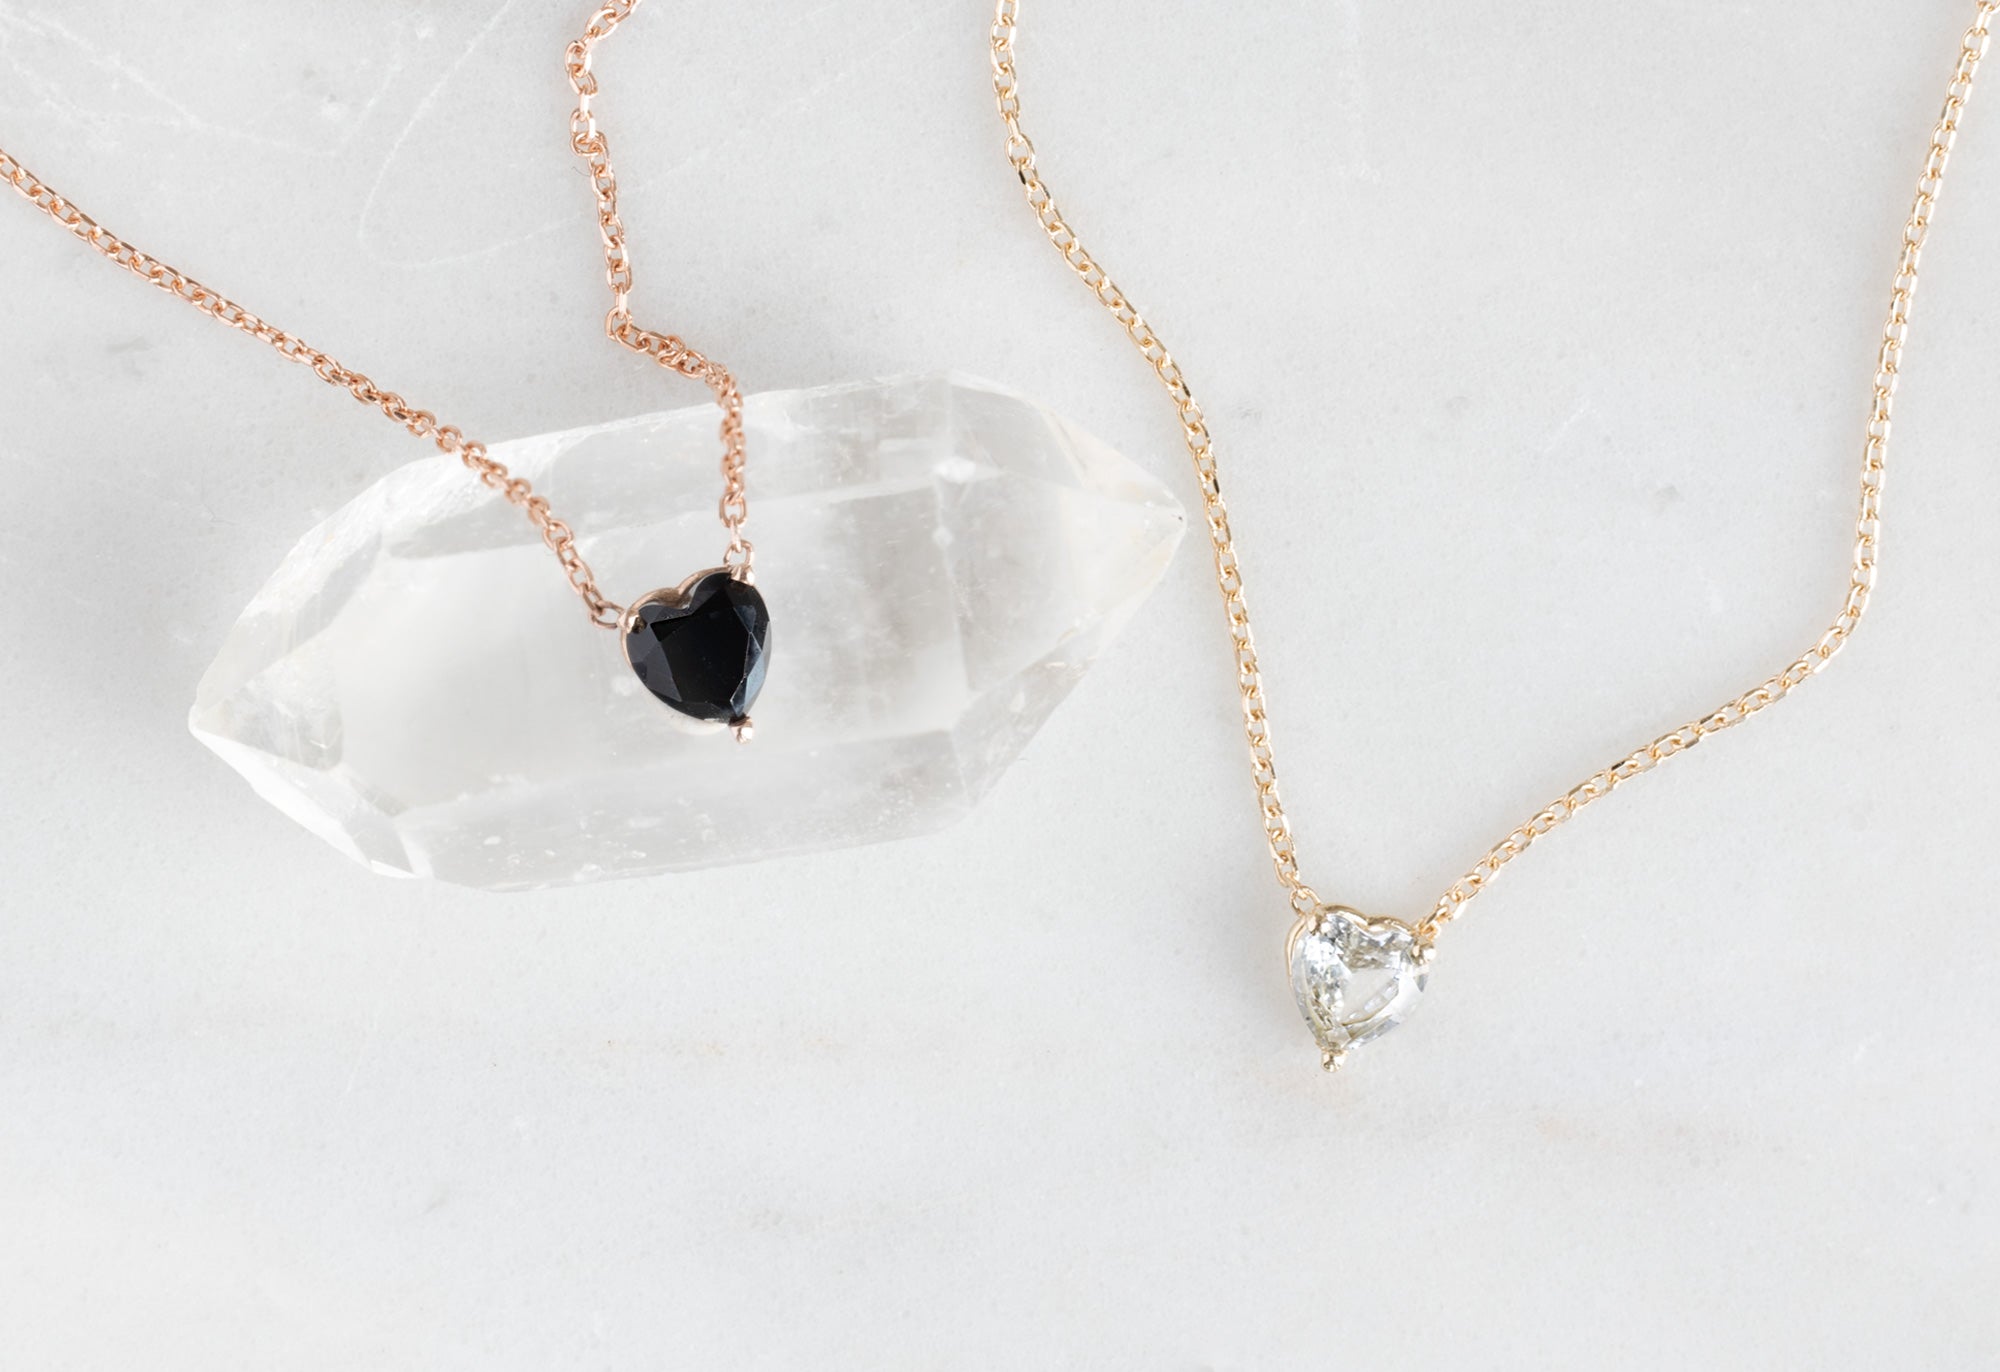 Alexis Russell - Gemstone Heart Necklace - Black Onyx / 14K Rose Gold